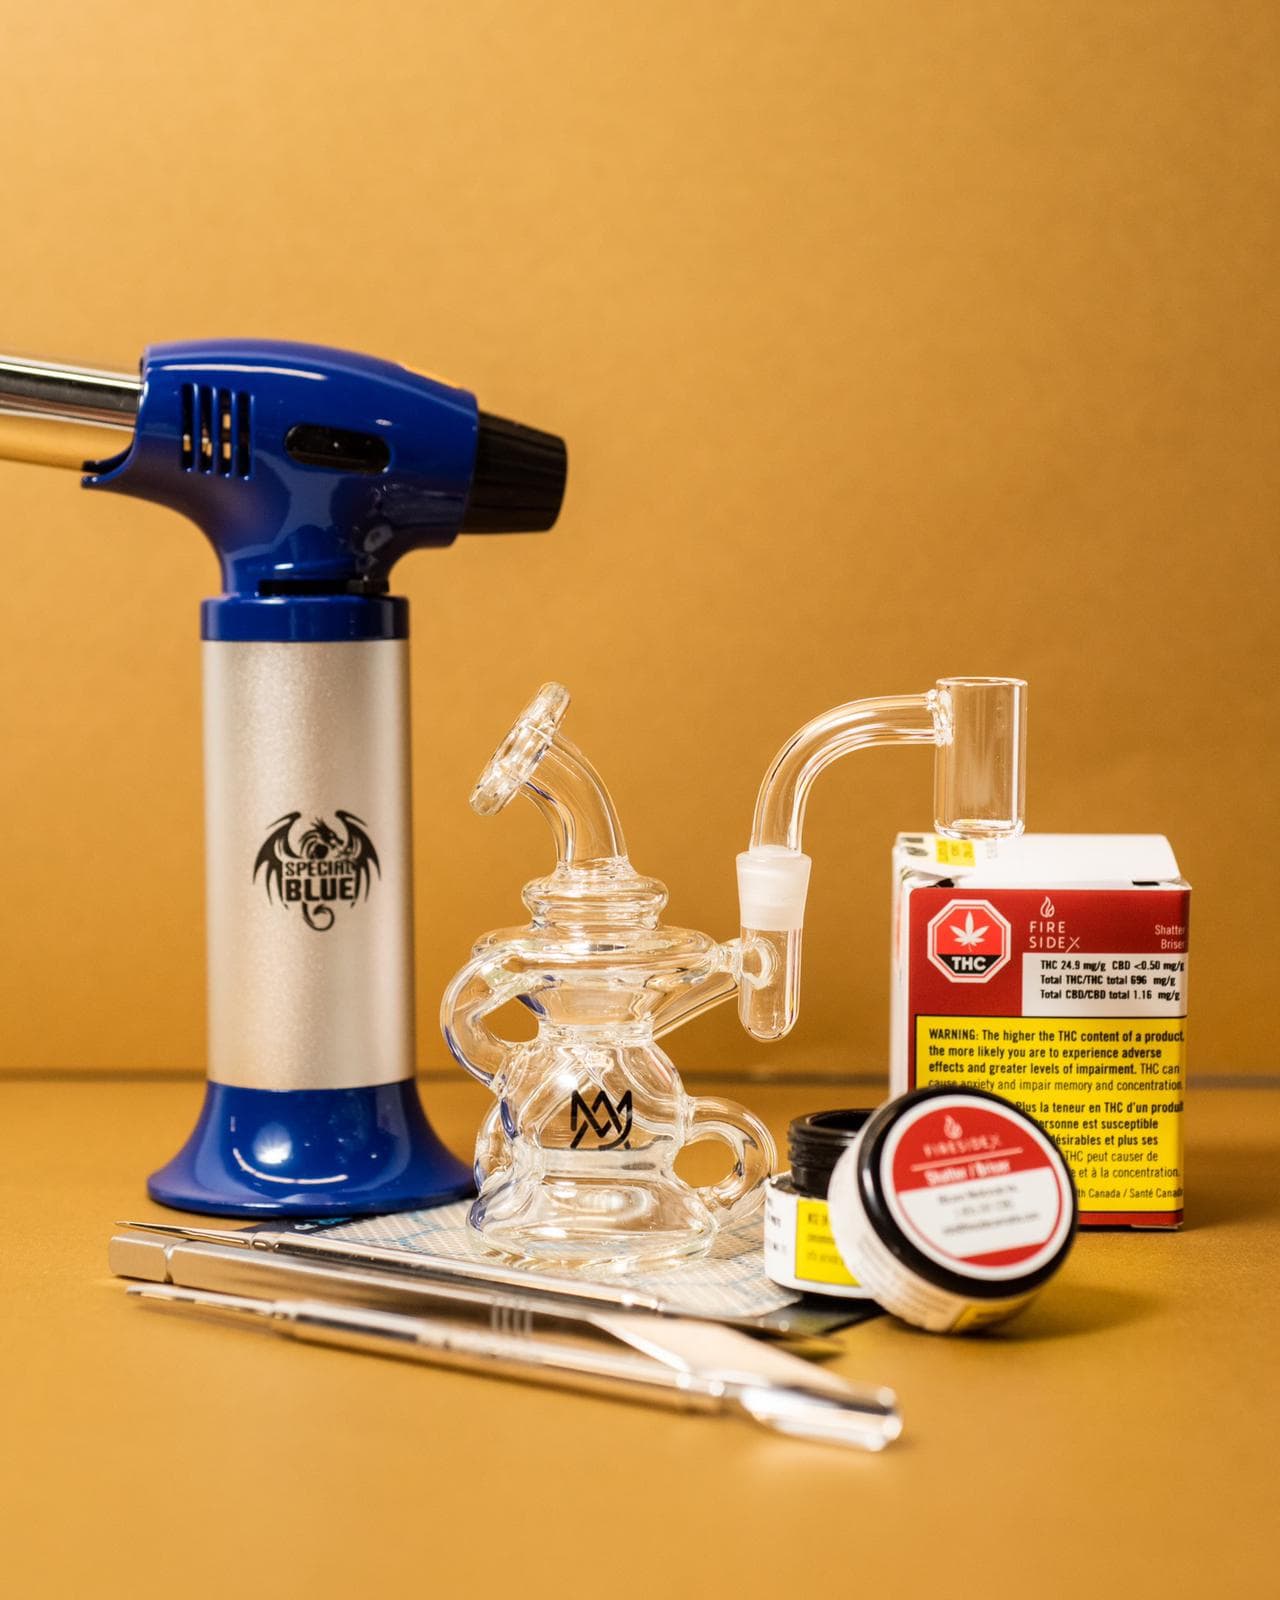 dab rig setup and materials for consuming concentrate cannabis